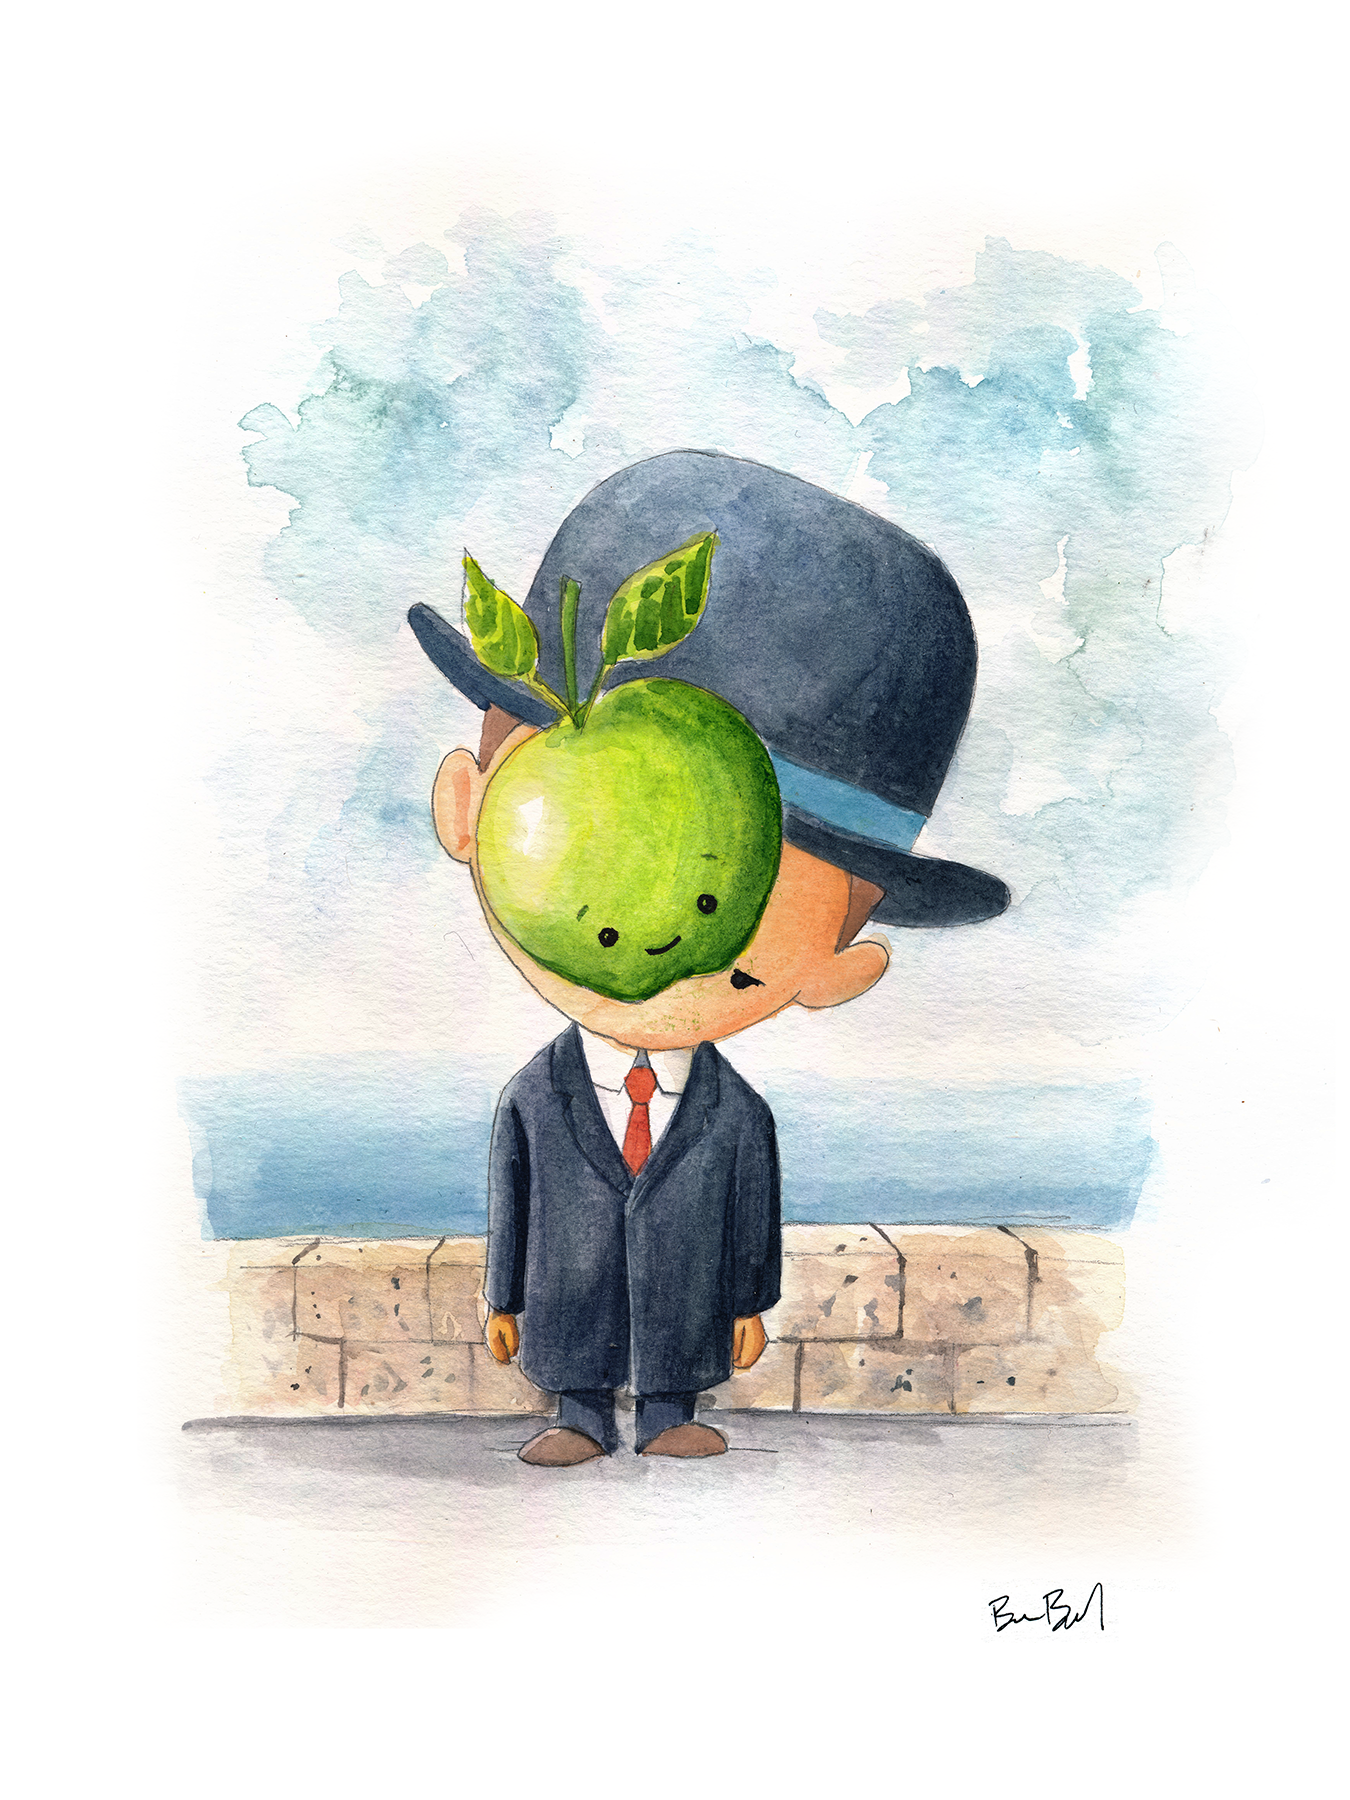 The Son of Man by René Magritte - Pop Parody Version Watercolor Print